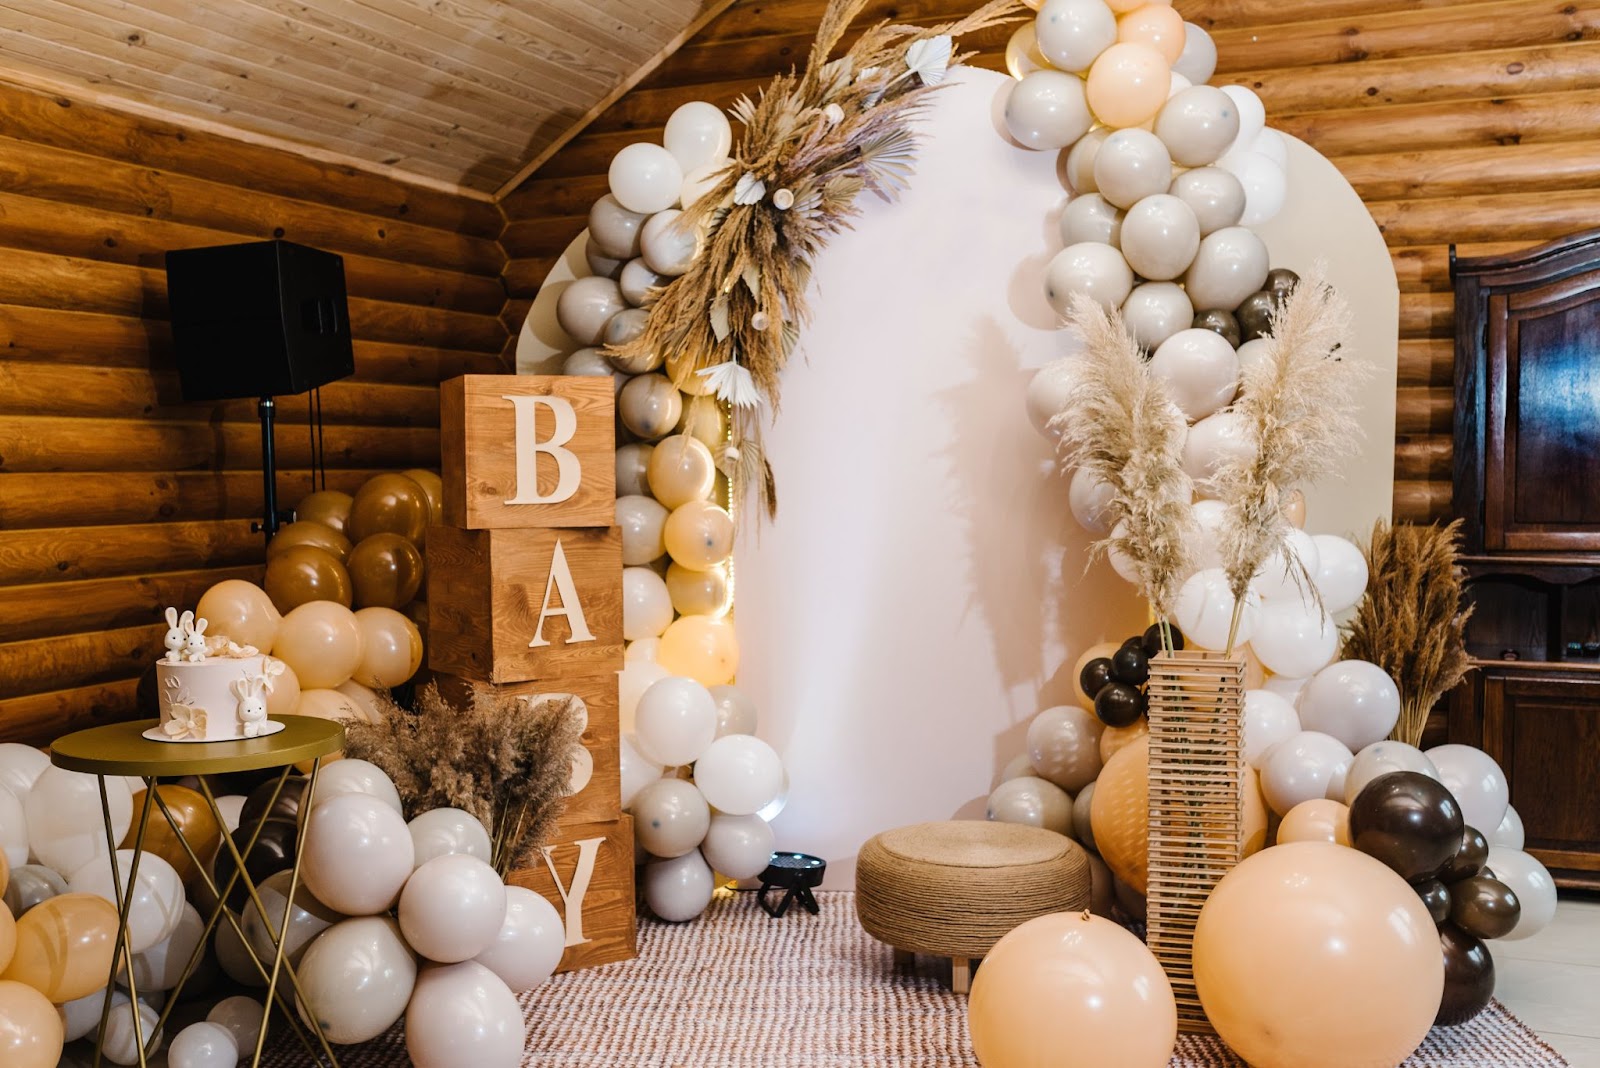 Beautiful luxury baby shower with balloons, garland and cake and stacked blocks that spell out BABY.